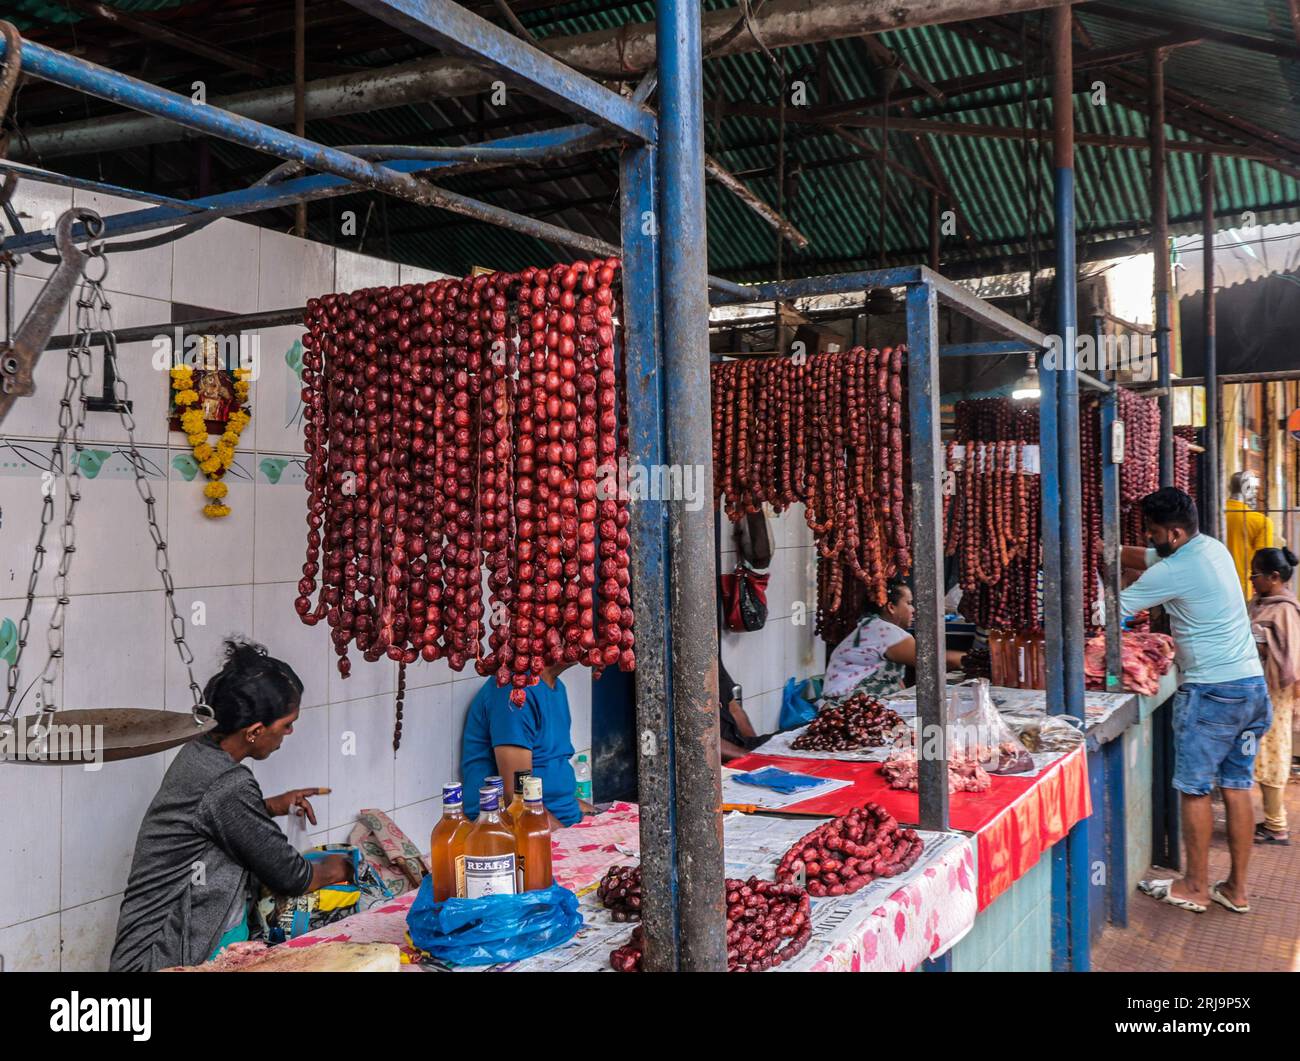 Margao, South Goa, India. 22nd Aug, 2023. pork sausages for sale in the Narrow passage ways selling anything imaginable in the busy and colourful market at the city of Margao, South India.Paul Quezada-Neiman/Alamy Live News Credit: Paul Quezada-Neiman/Alamy Live News Stock Photo